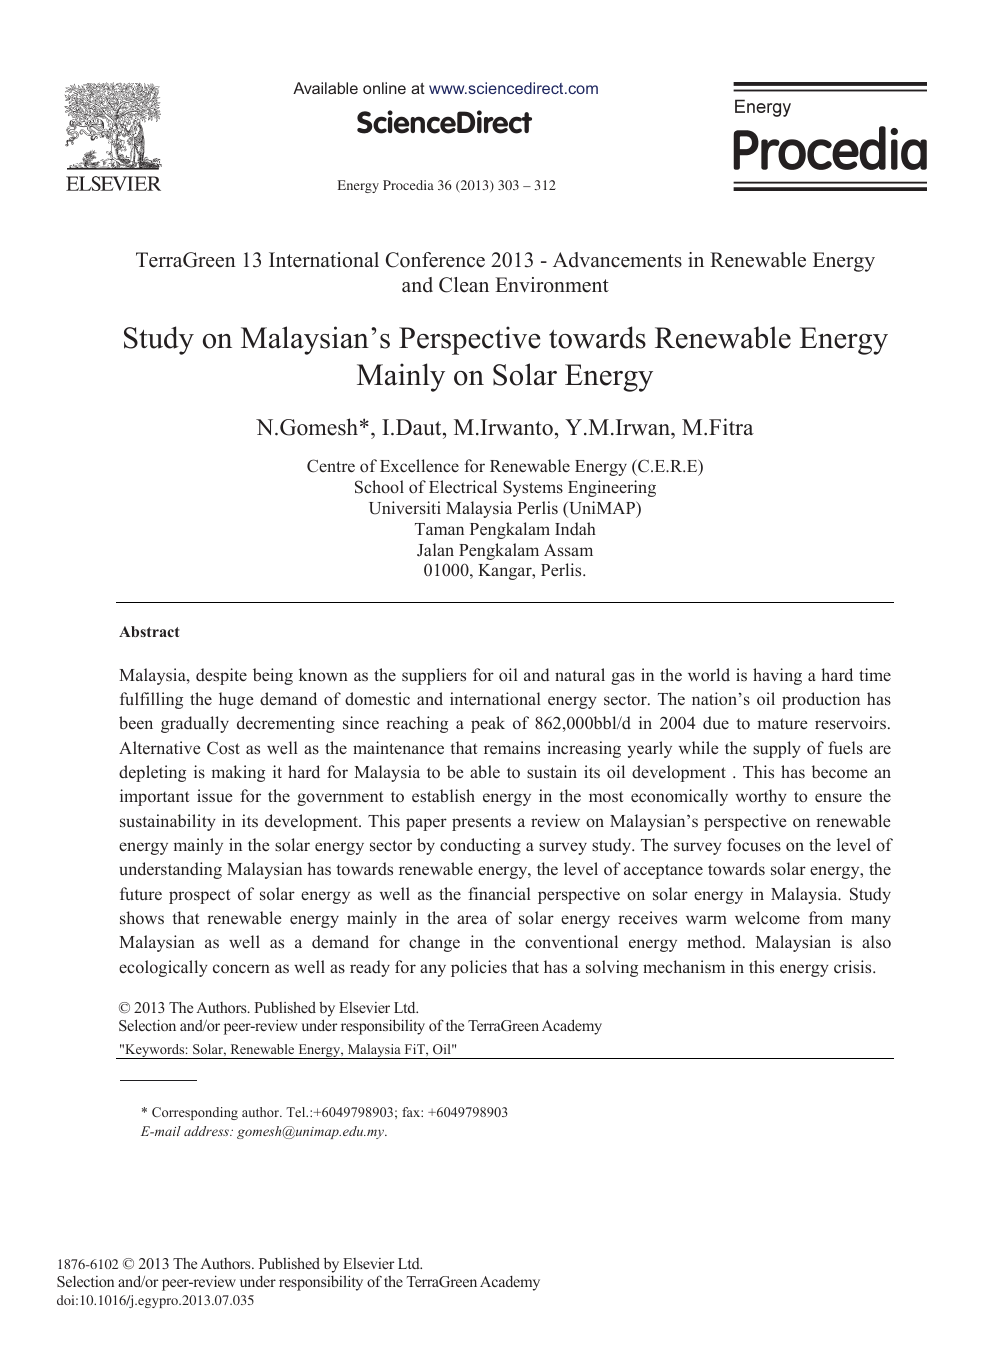 Study On Malaysian S Perspective Towards Renewable Energy Mainly On Solar Energy Topic Of Research Paper In Earth And Related Environmental Sciences Download Scholarly Article Pdf And Read For Free On Cyberleninka